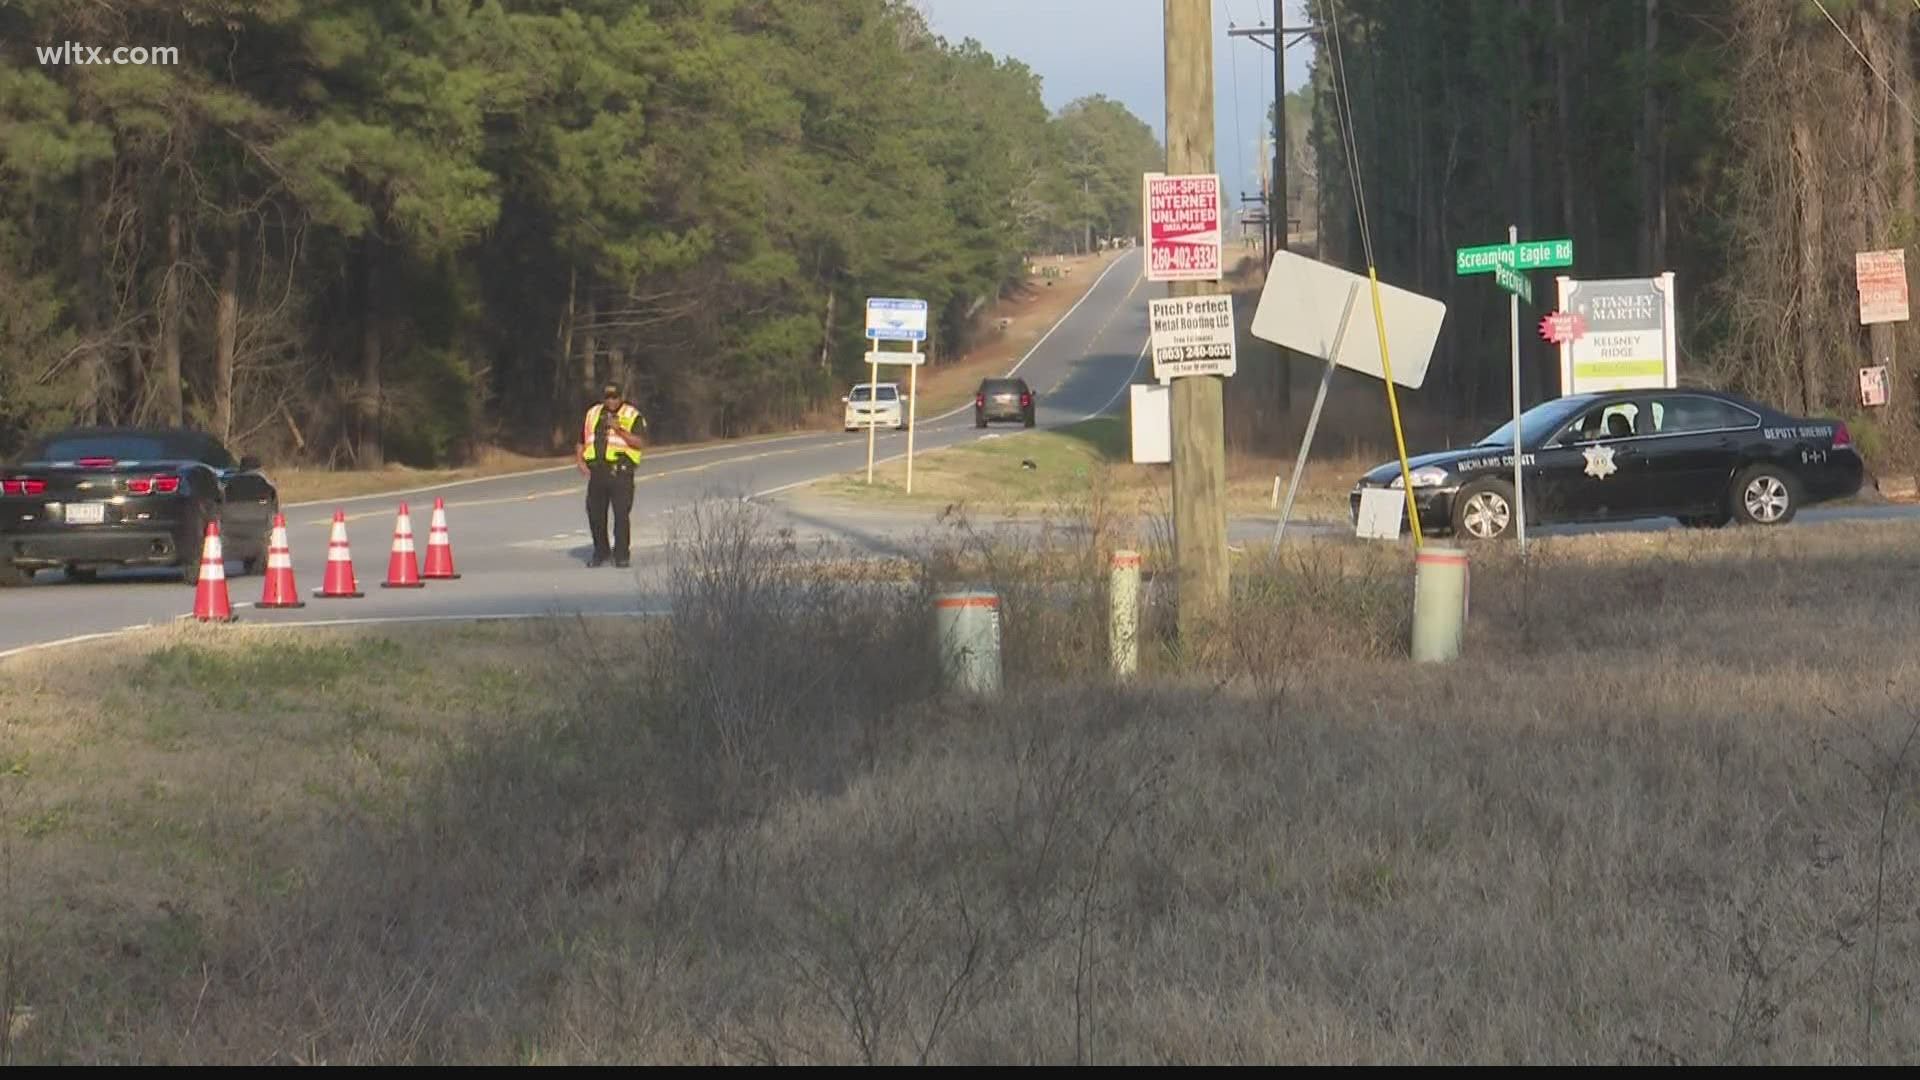 Law enforcement has released new details in a double fatality on Screaming Eagle road